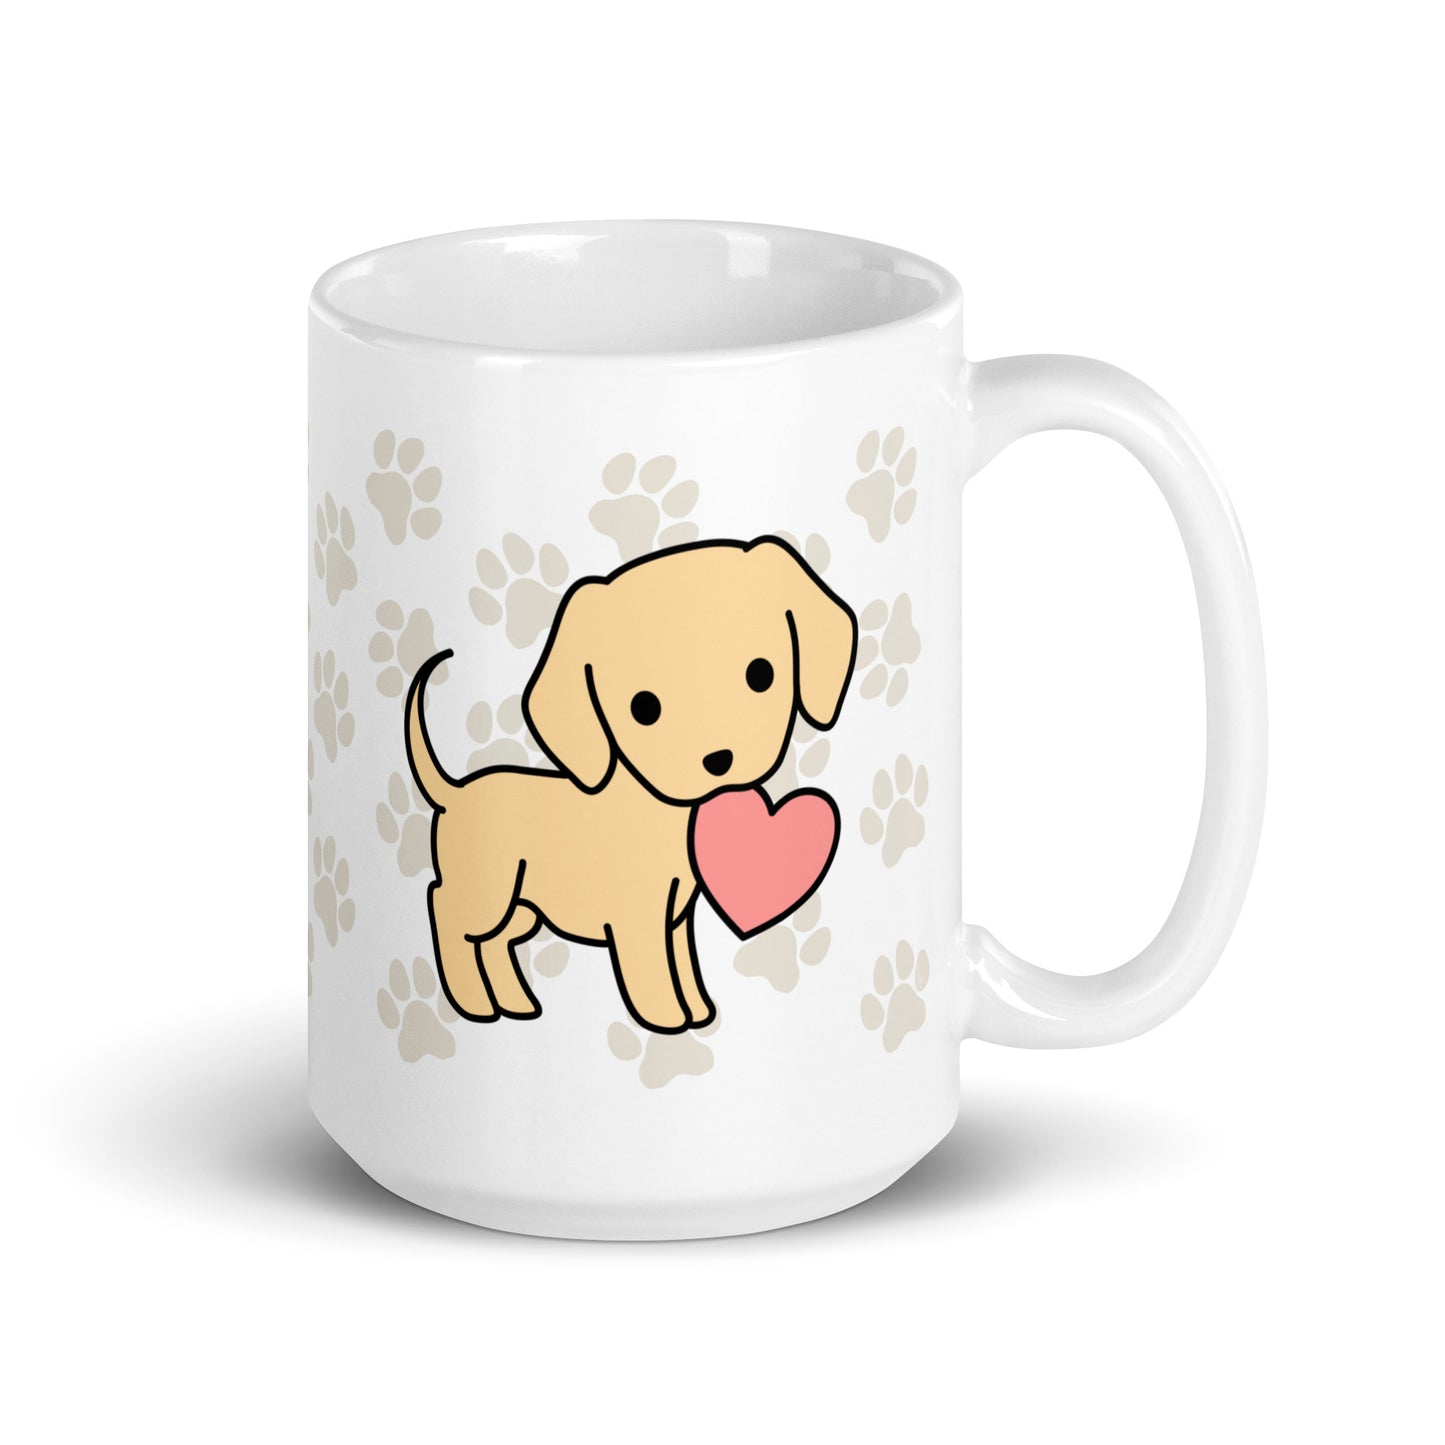 A white 15 ounce ceramic mug with a pattern of light brown pawprints all over. The mug also features a stylized illustration of a Yellow Lab holding a heart in its mouth.